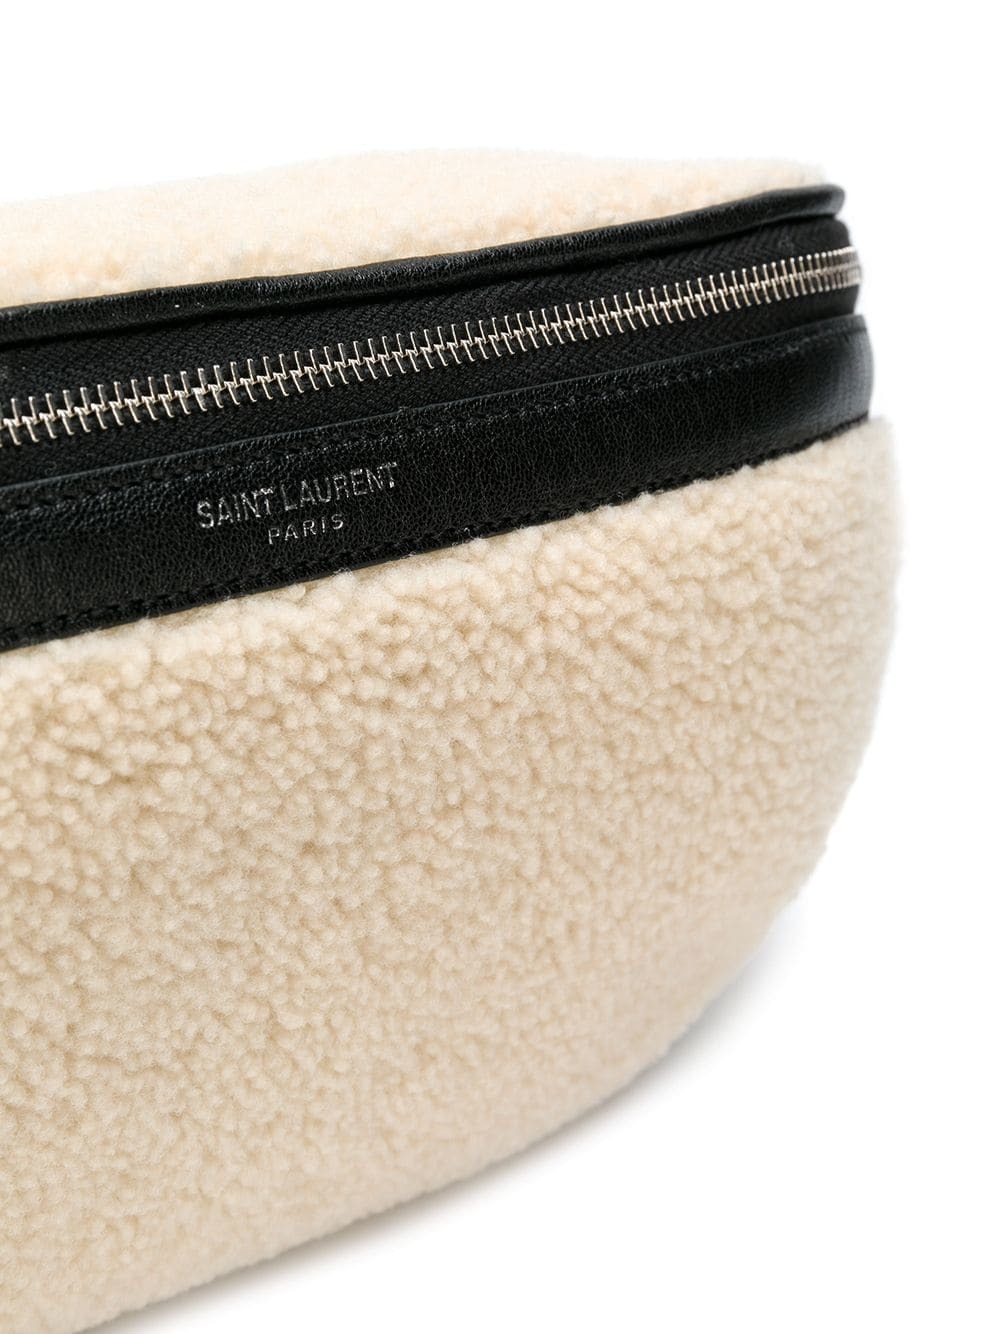 VIDEO: SAINT LAURENT Shearling Belt Bag Review + 5 WAYS TO STYLE IT! —  WOAHSTYLE